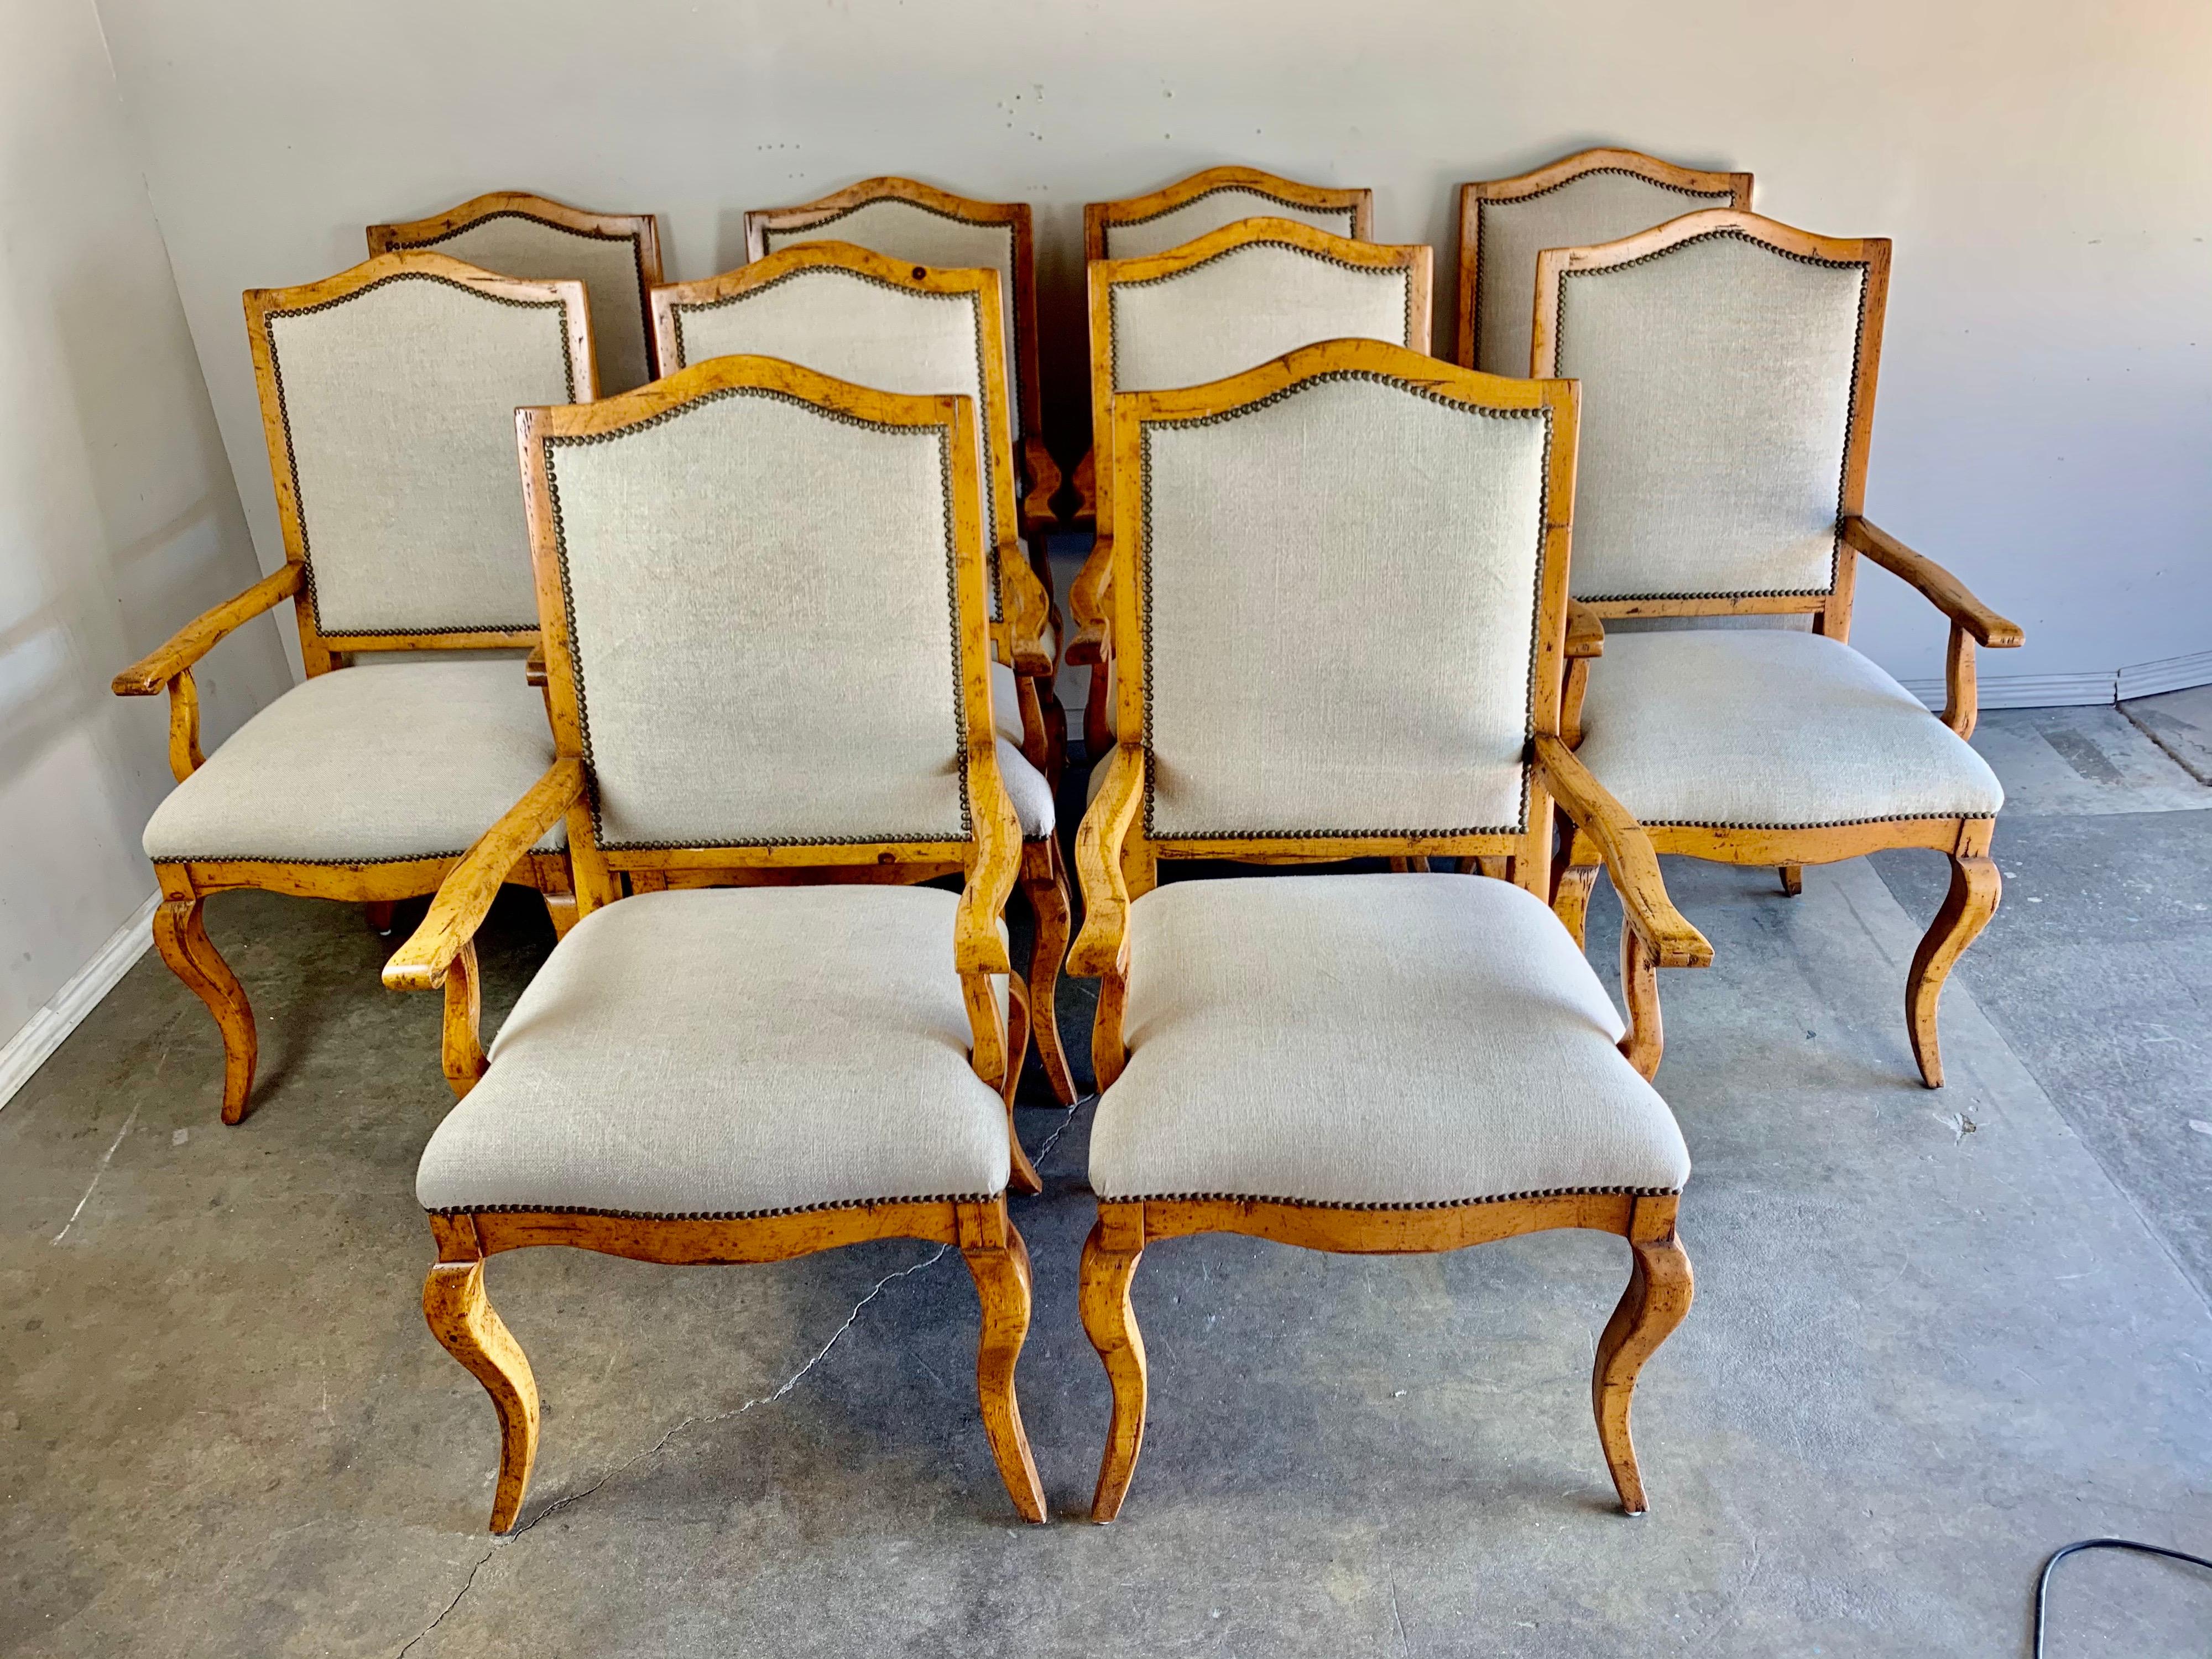 Set of ten pine dining armchairs that are newly upholstered in a washed Belgium linen with antique brass colored nailhead trim detail. The chairs have an eyebrow shaped top and stand on four cabriole shaped legs.